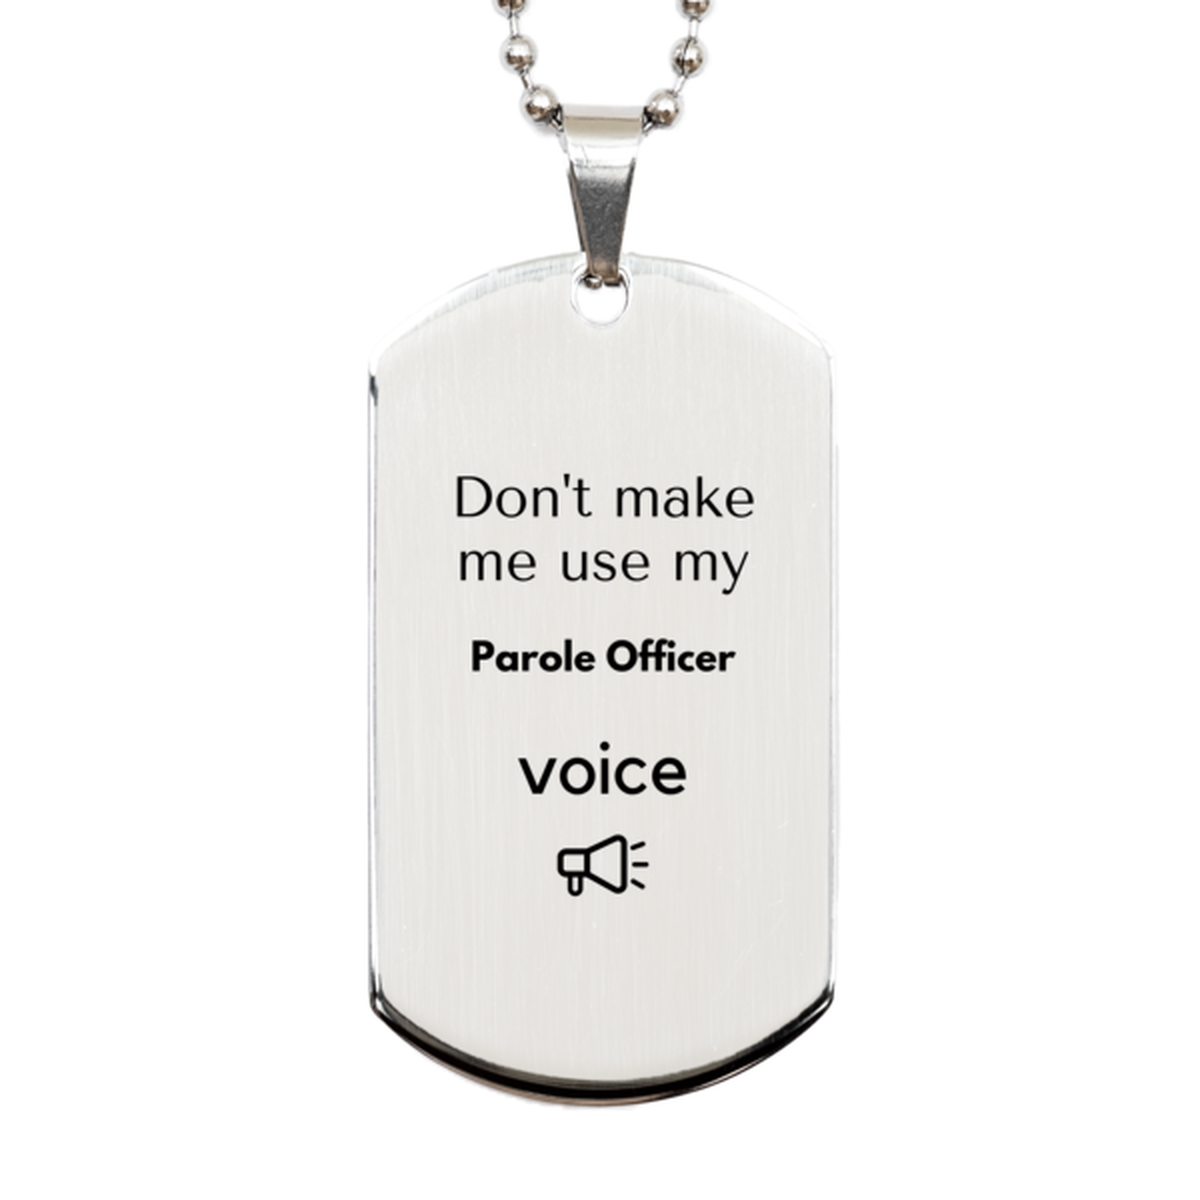 Don't make me use my Parole Officer voice, Sarcasm Parole Officer Gifts, Christmas Parole Officer Silver Dog Tag Birthday Unique Gifts For Parole Officer Coworkers, Men, Women, Colleague, Friends